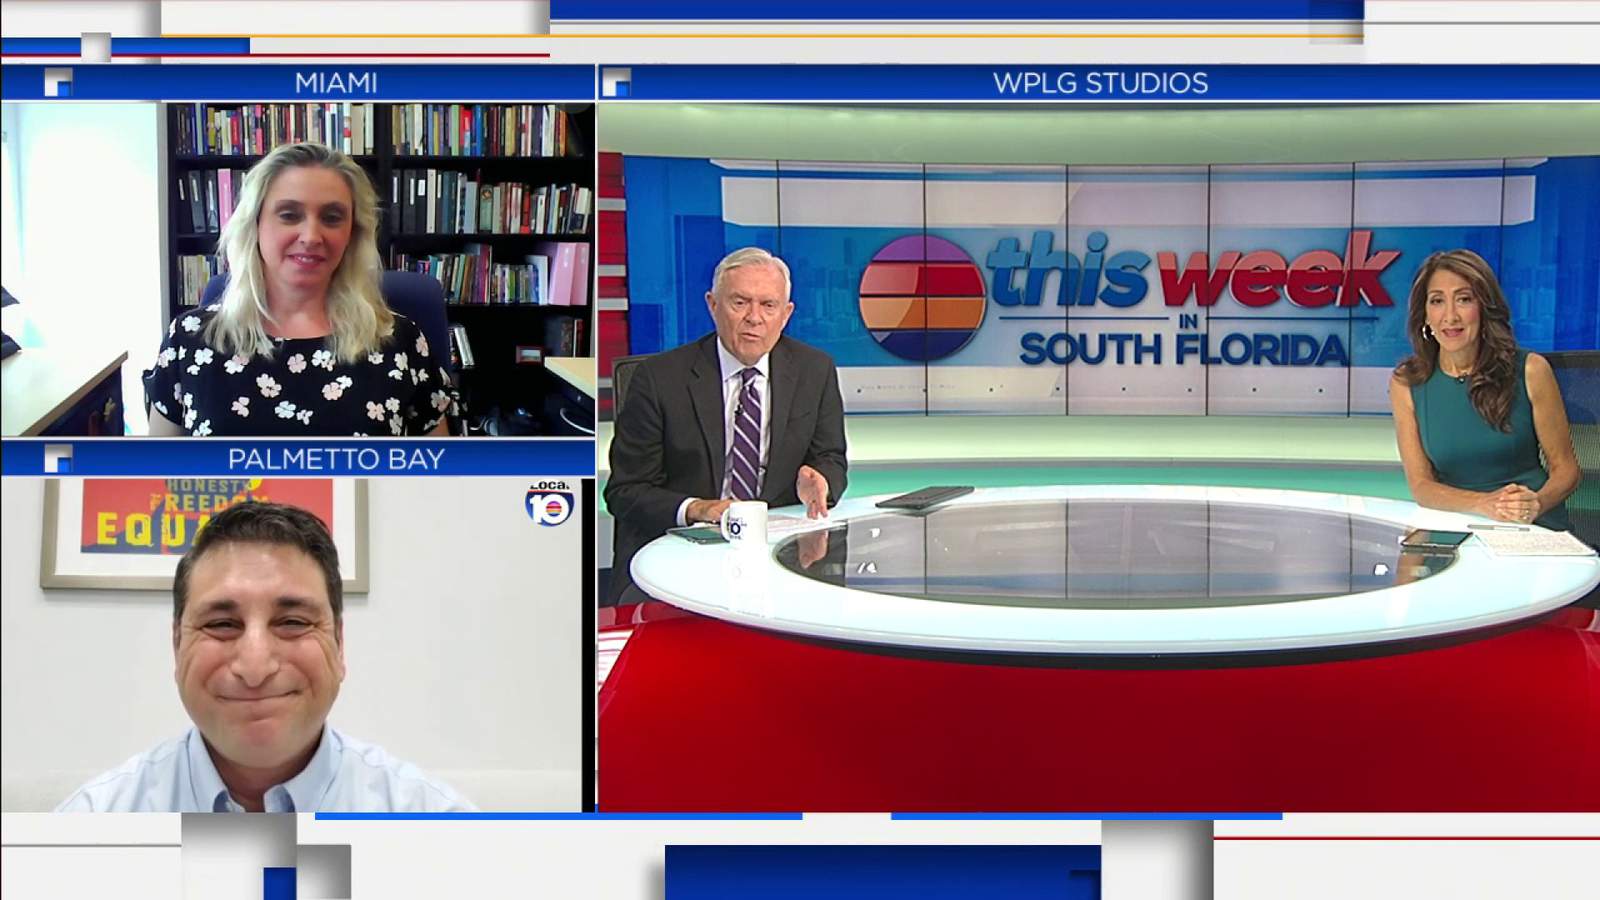 This Week in South Florida: Kathryn DePalo-Gould and Sean Forman